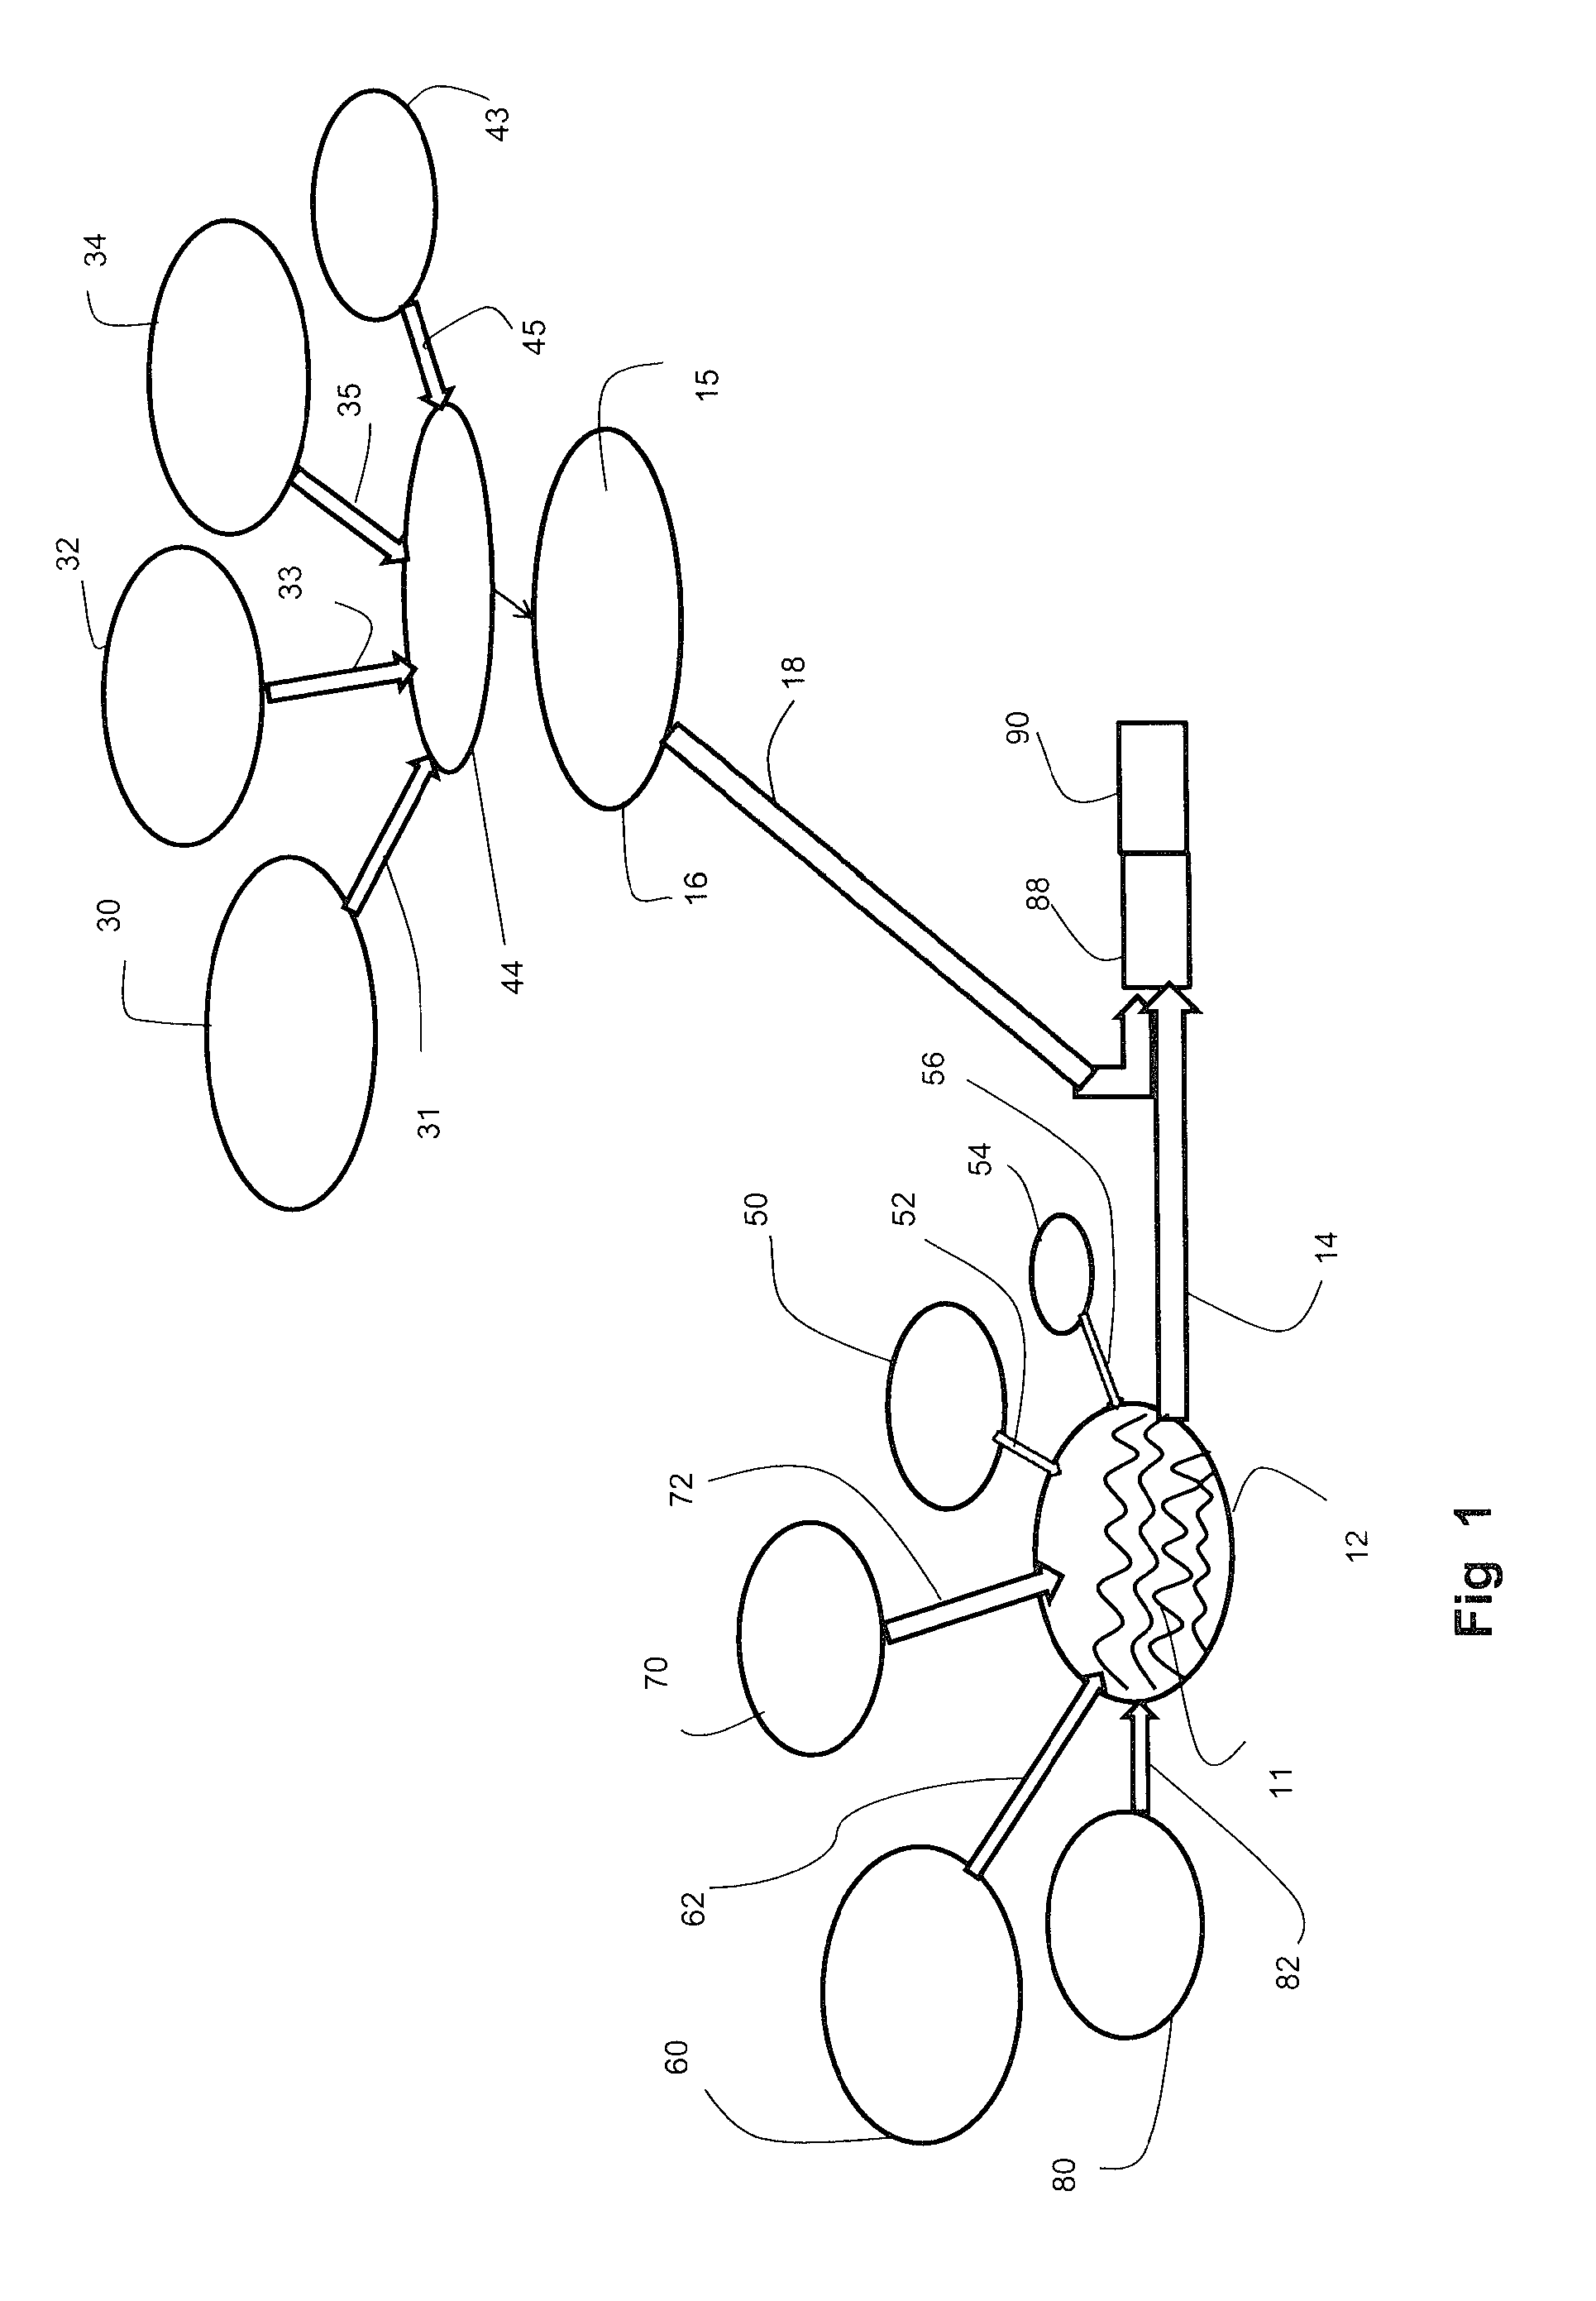 Method for making phase change products from an encapsulated phase change material